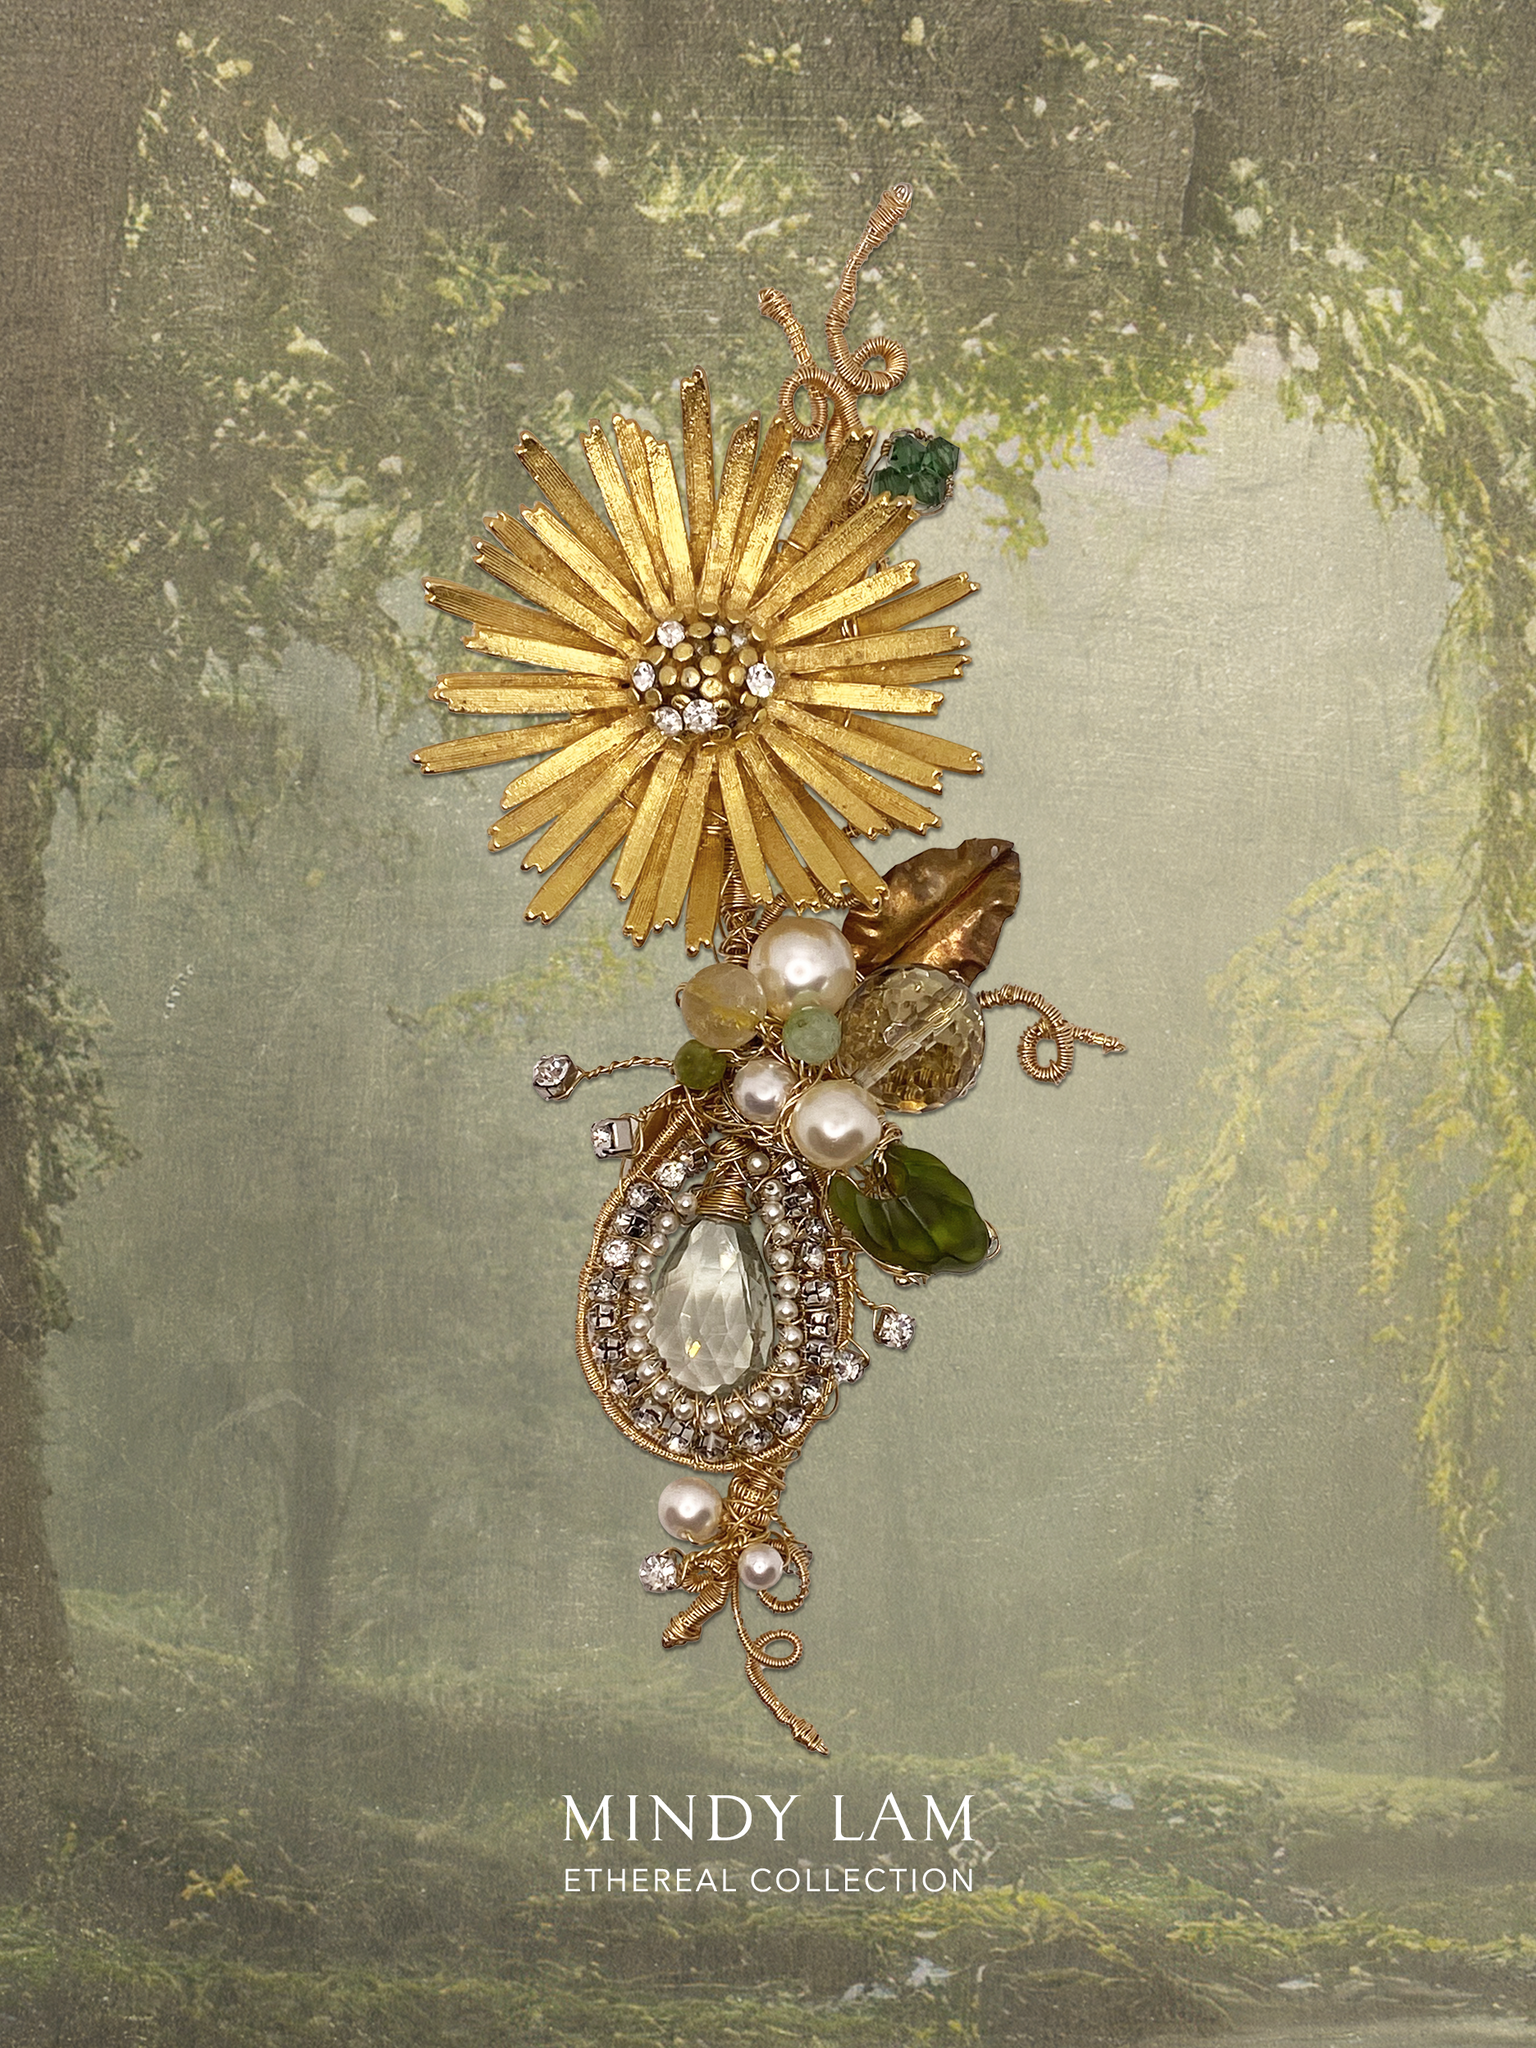 Ethereal Collection Lapel Pin - Charm of the Golden Daisy